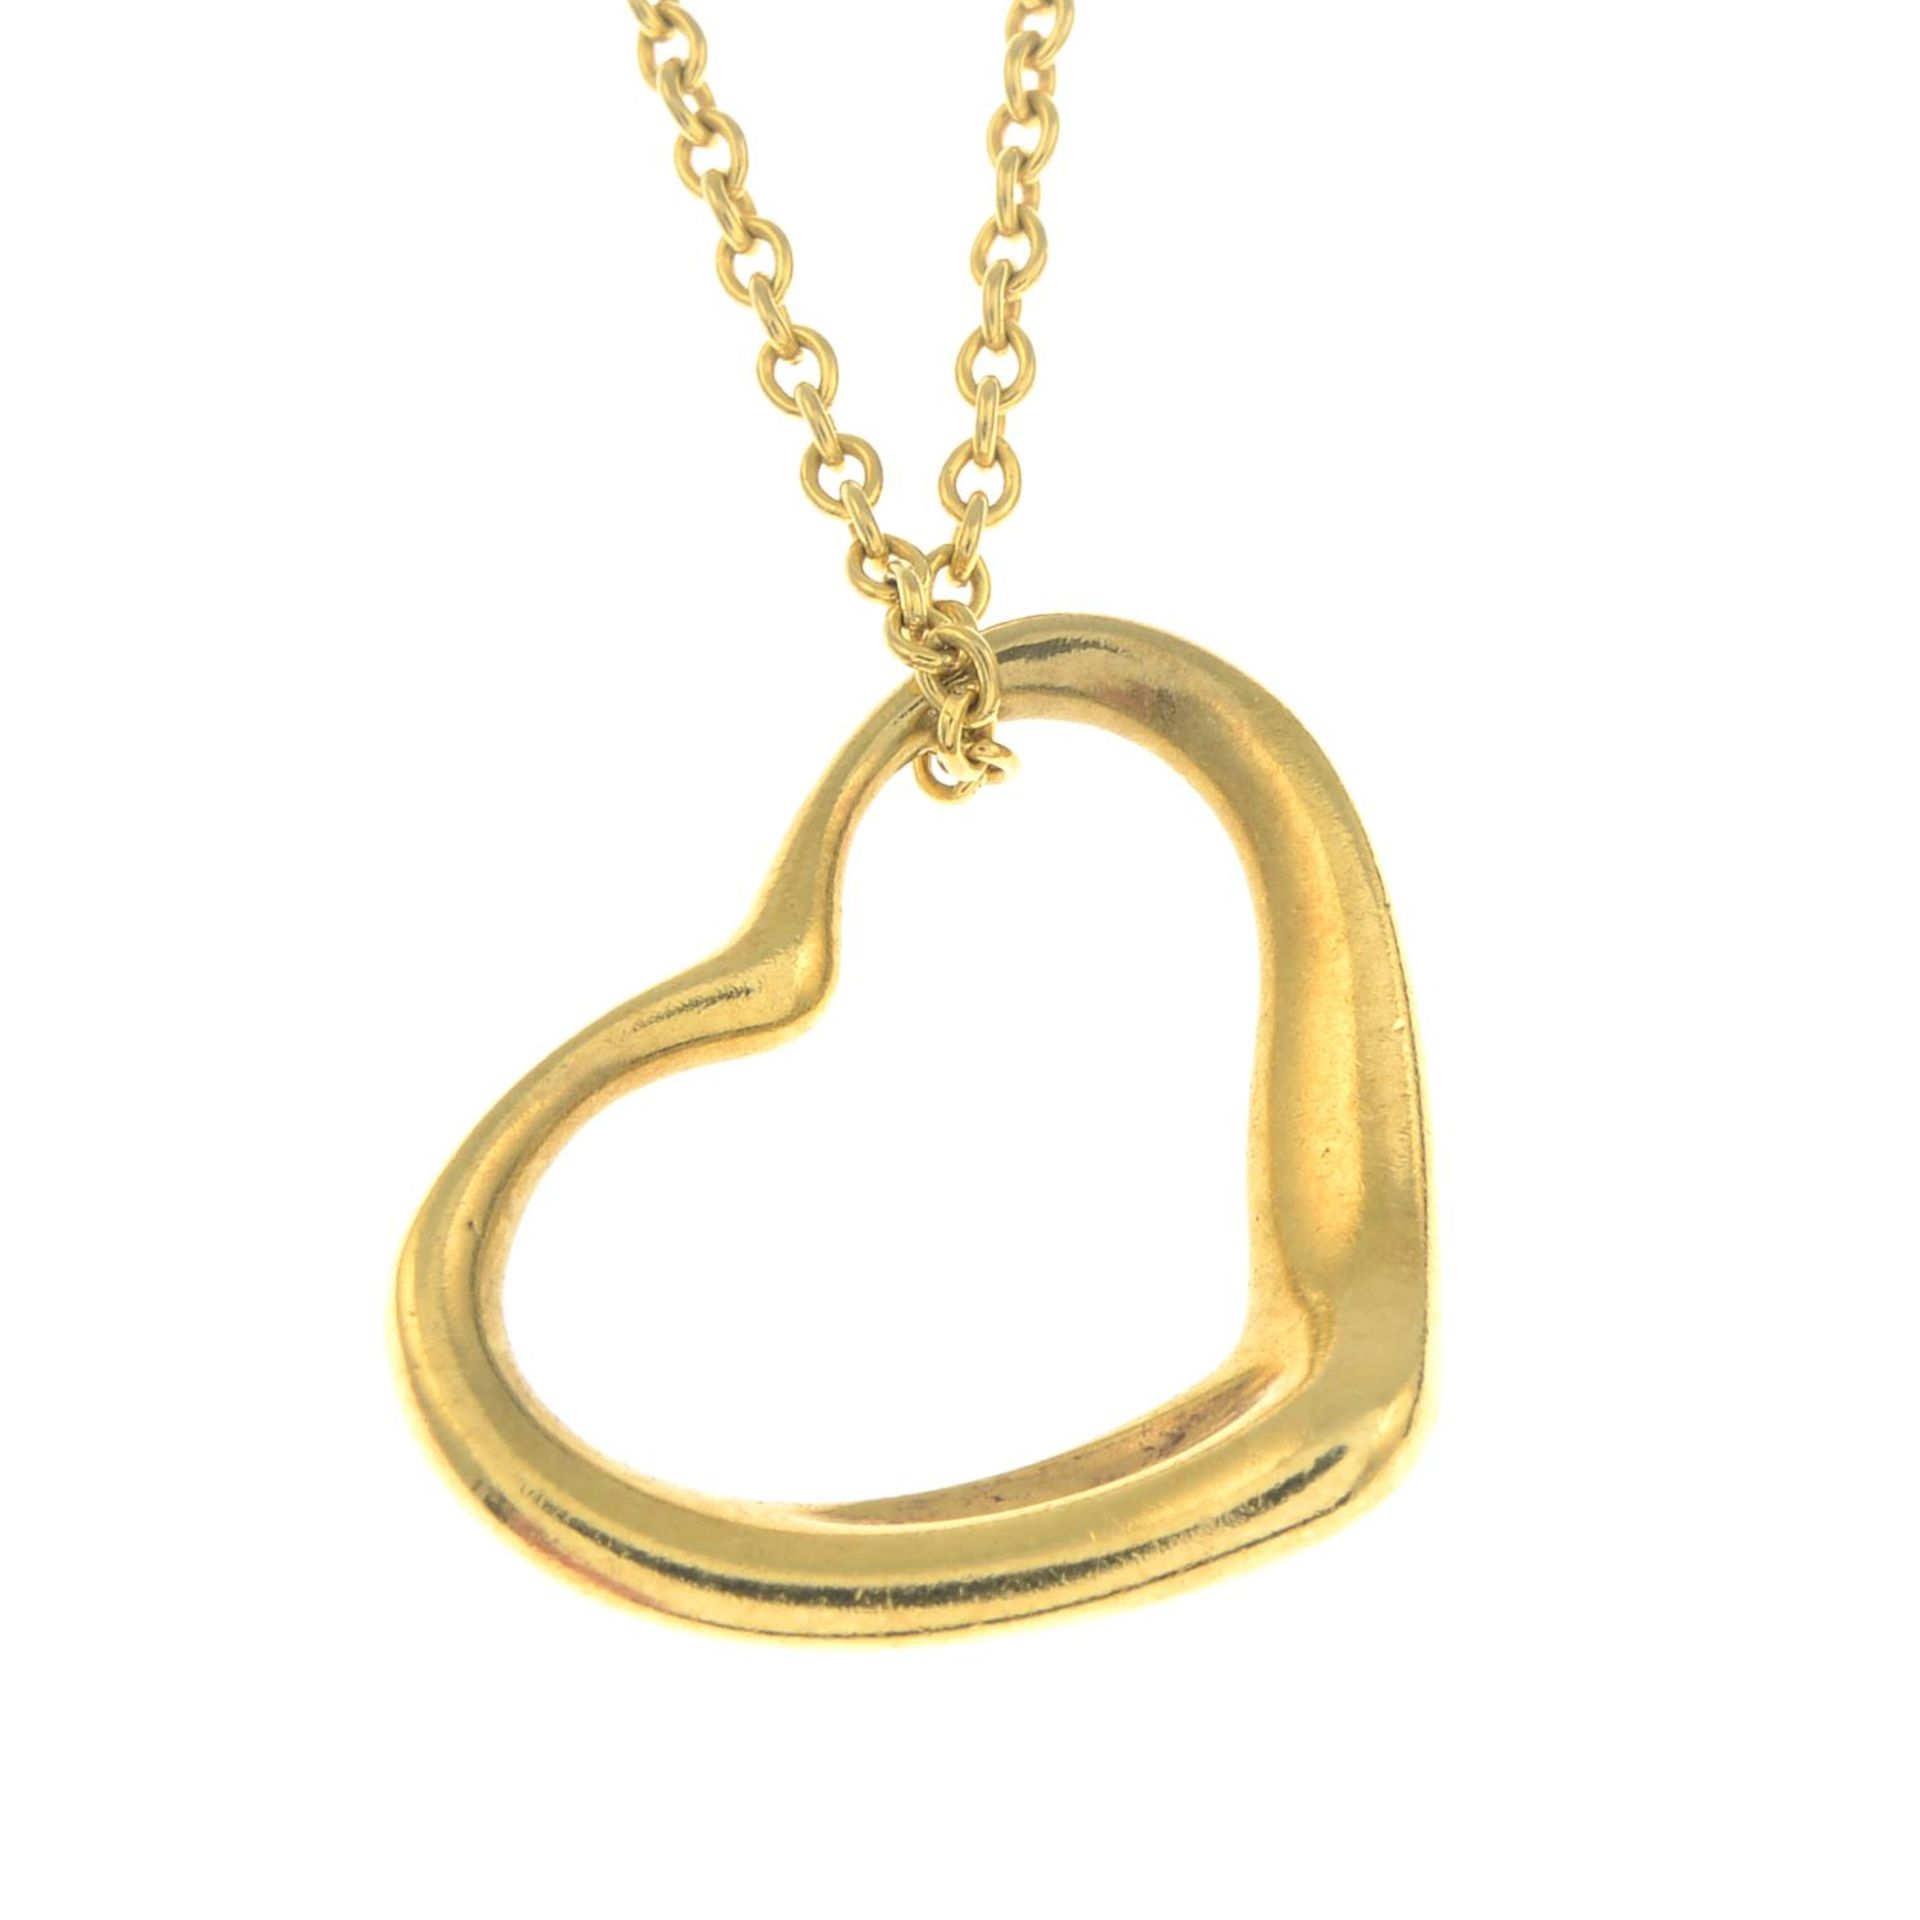 An 'Open Heart' pendant with chain, by Elsa Peretti for Tiffany & Co.Signed Tiffany & Co.